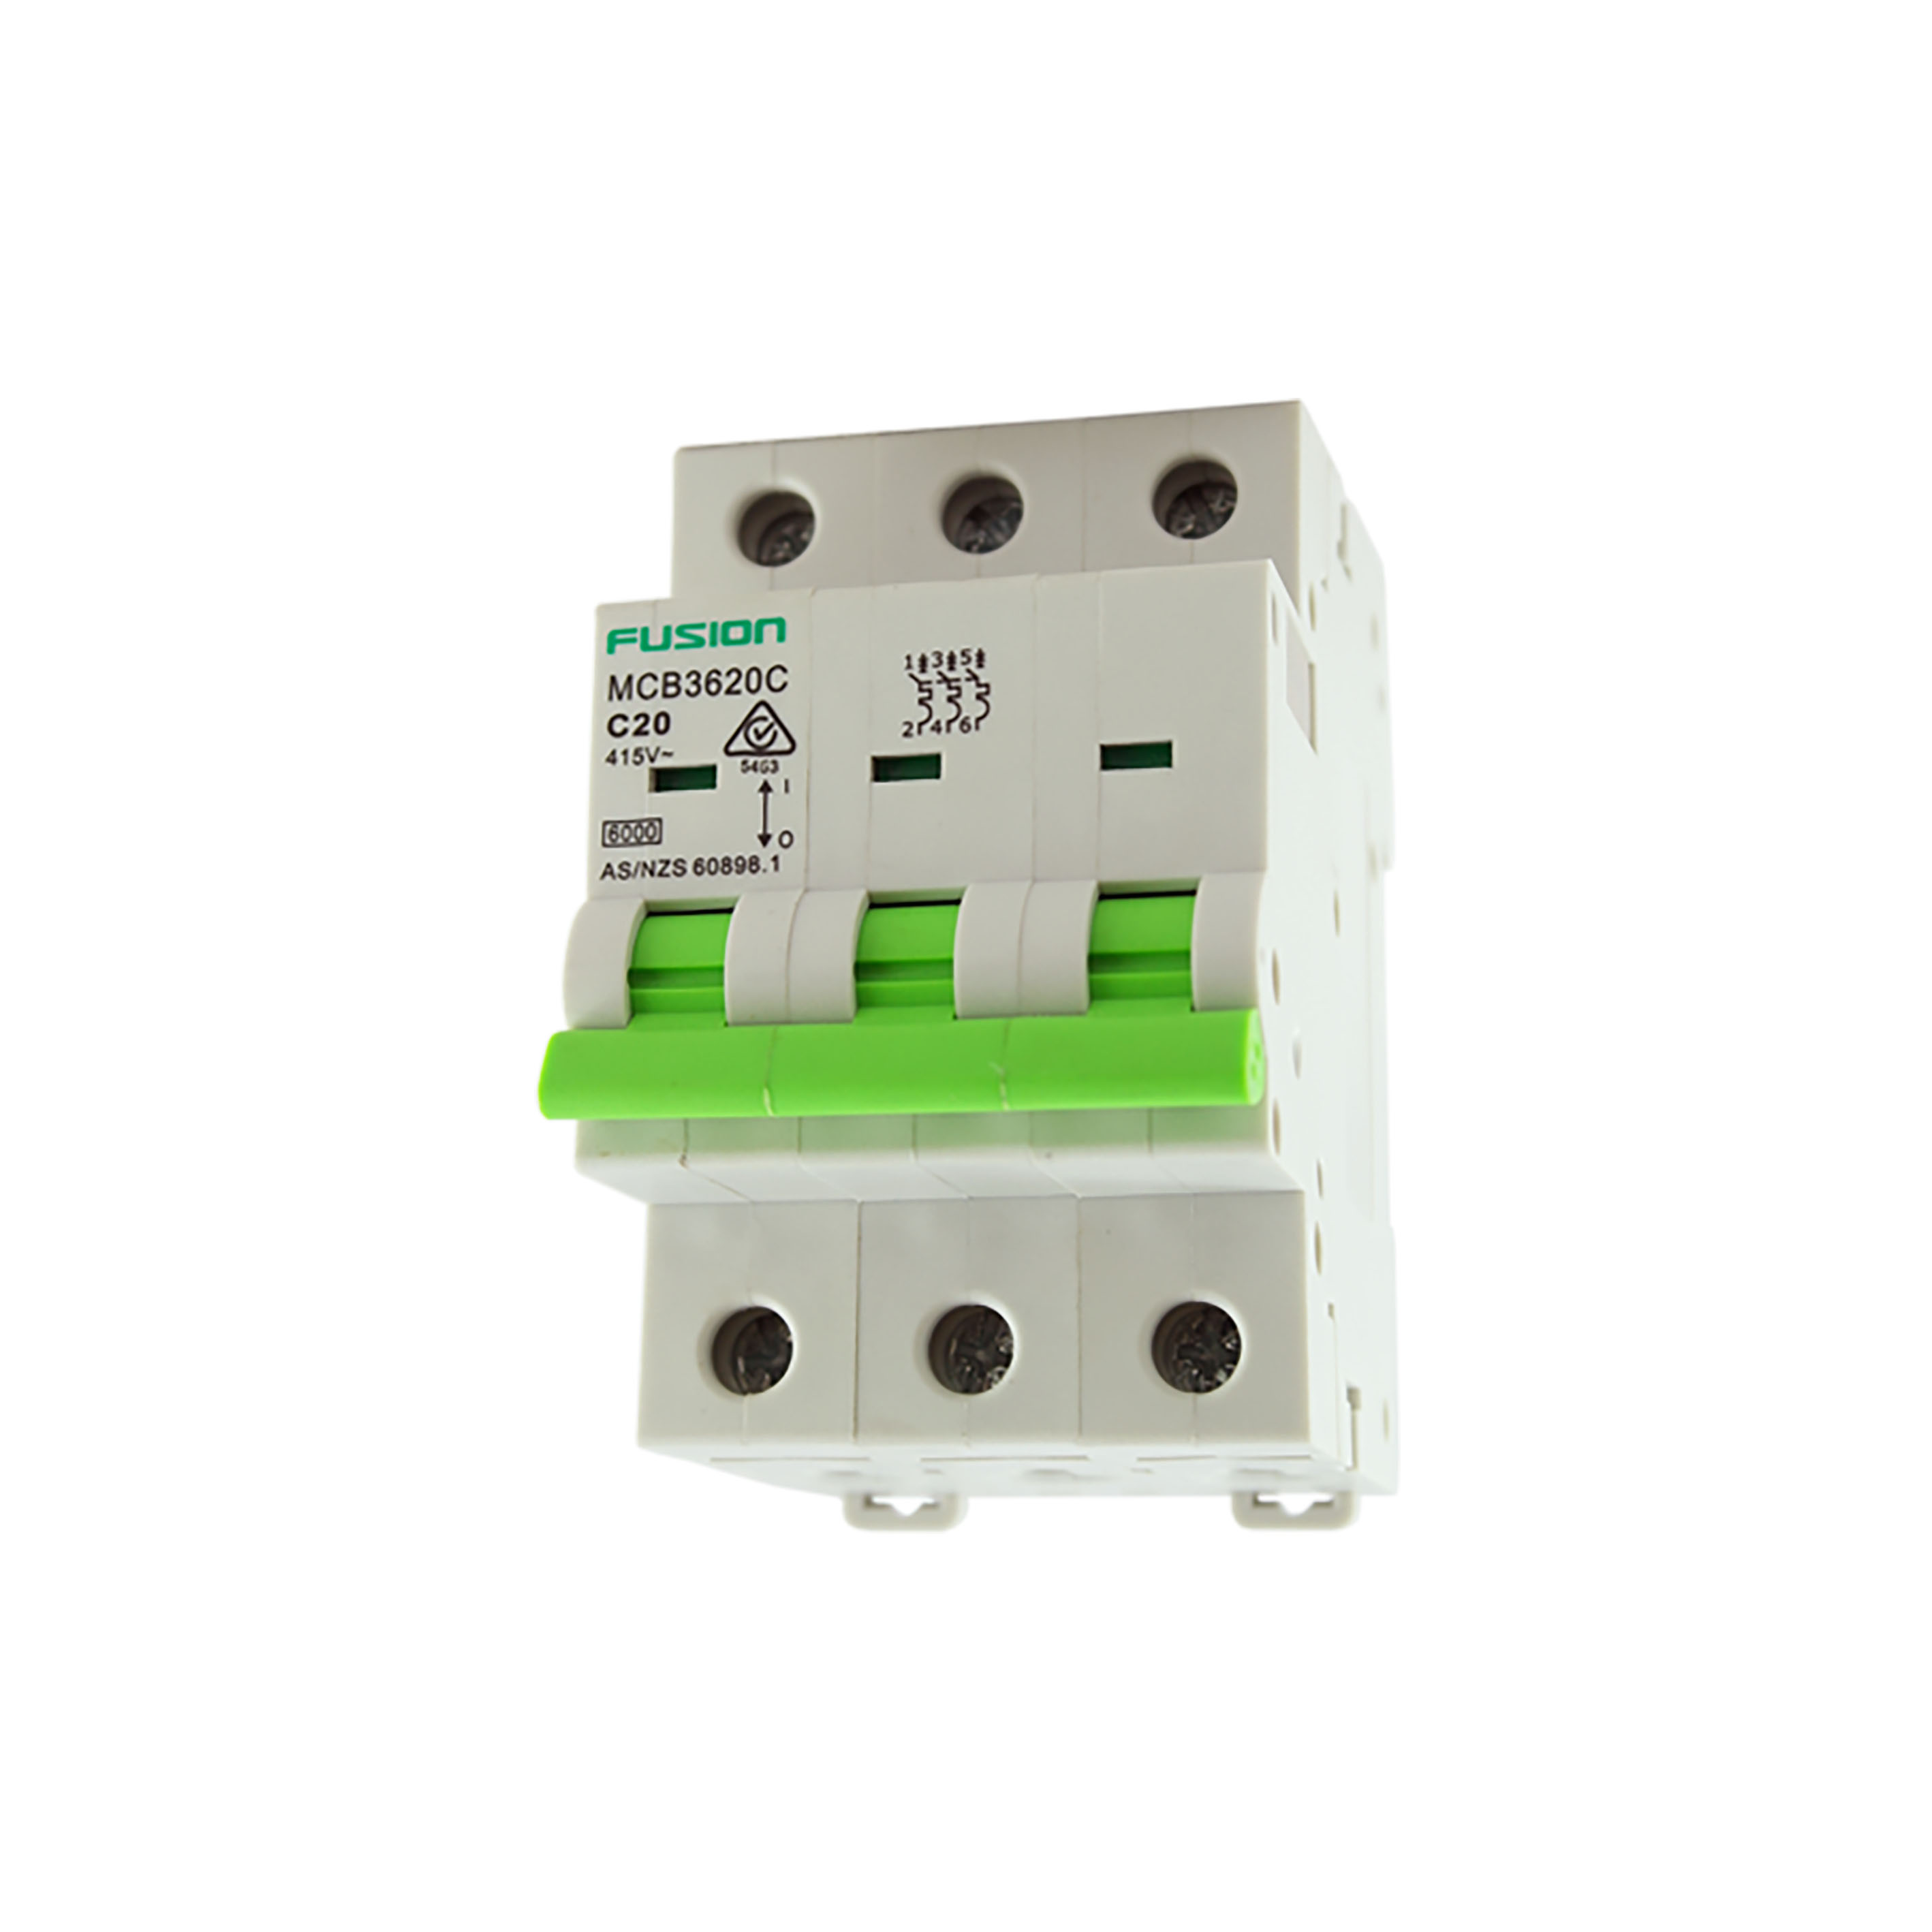 Connected 3 Phase 25amp D Curve Circuit Breaker 6kA - MCB3625D